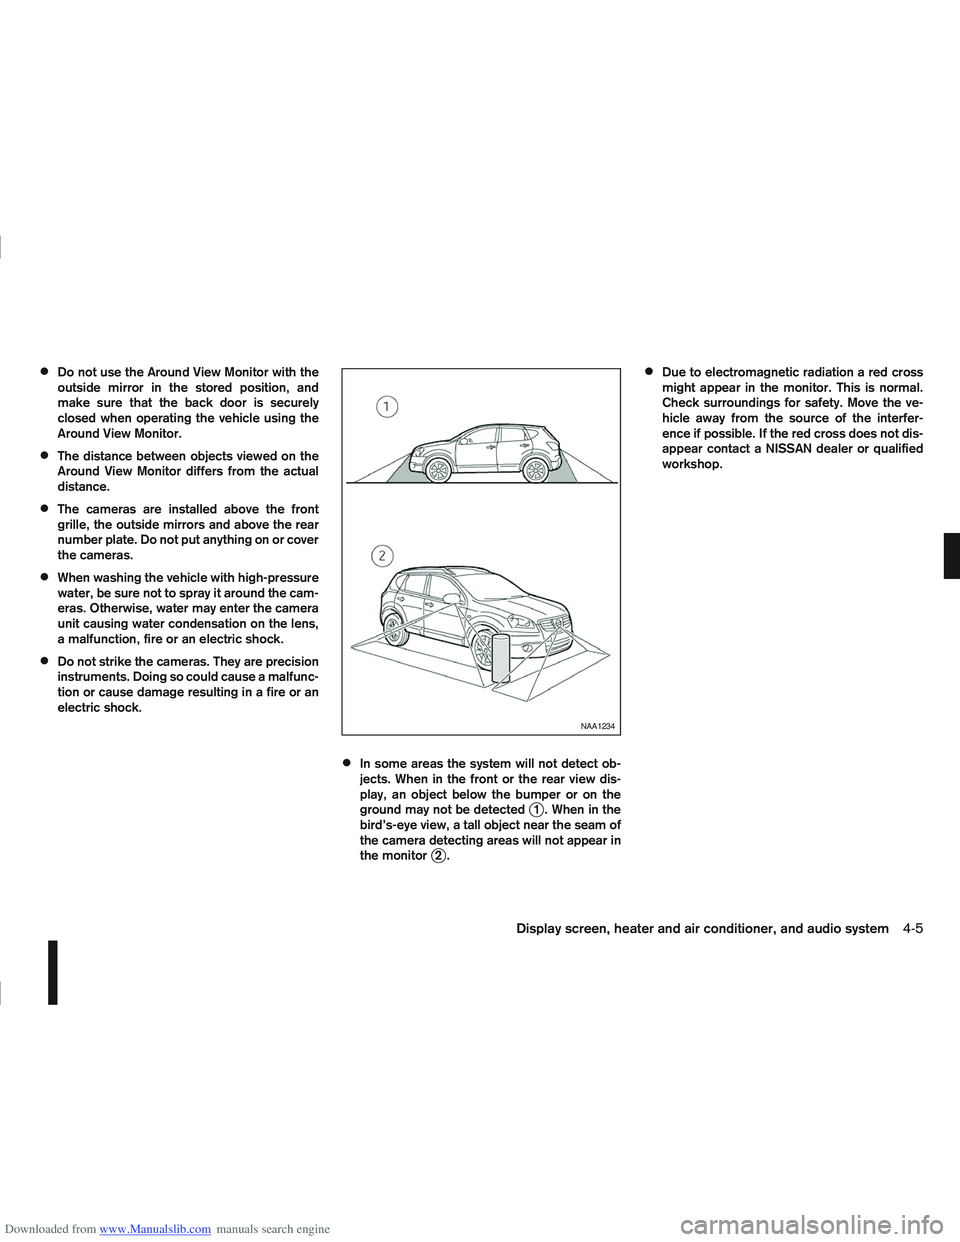 NISSAN QASHQAI 2012  Owners Manual Downloaded from www.Manualslib.com manuals search engine Do not use the Around View Monitor with the
outside mirror in the stored position, and
make sure that the back door is securely
closed when ope